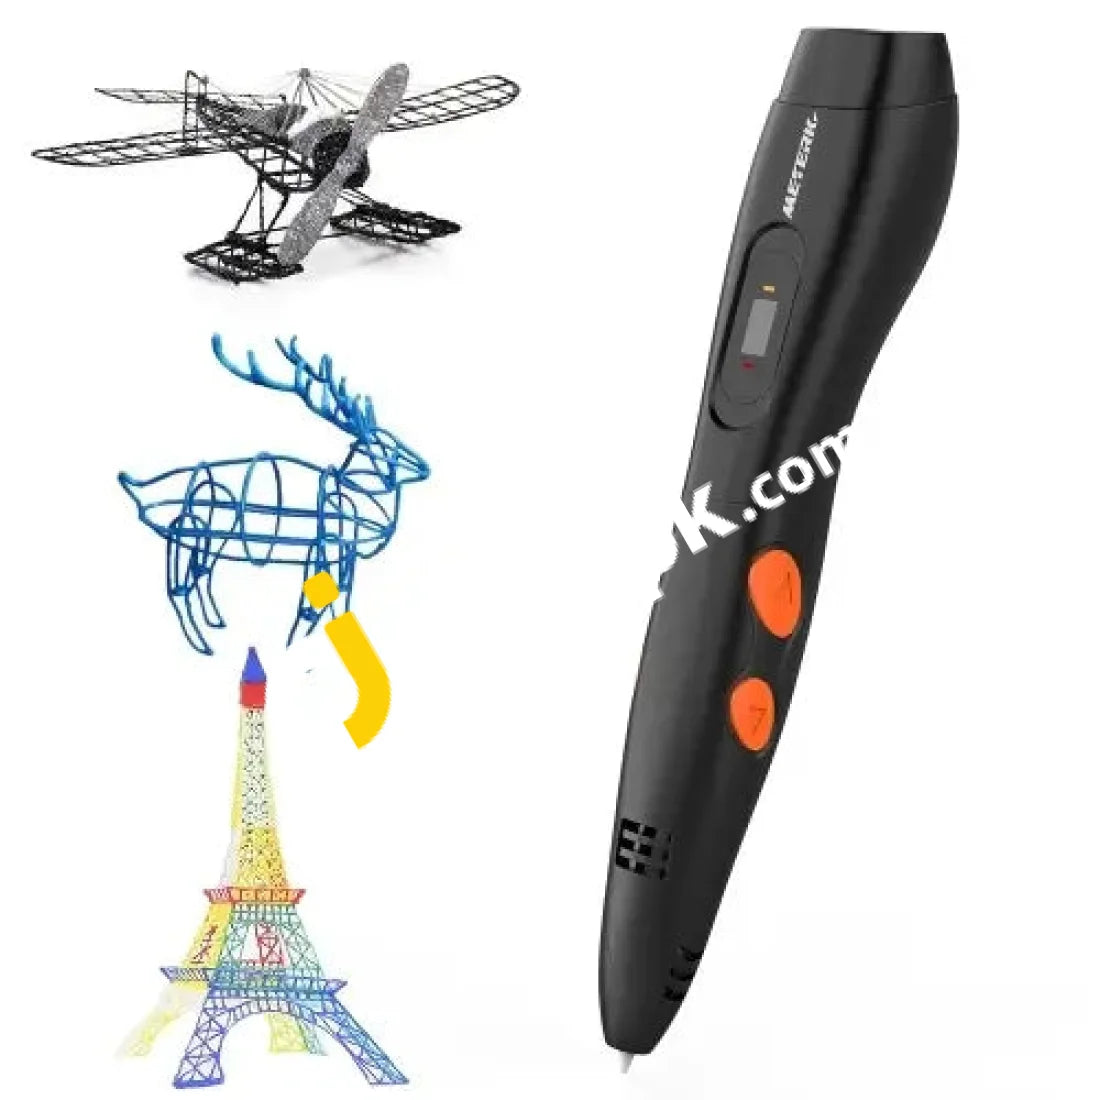 Meterk 3D Printing Pen Intelligent Doodler With Lcd Display & 16 Loops Of Filaments Imported From Uk